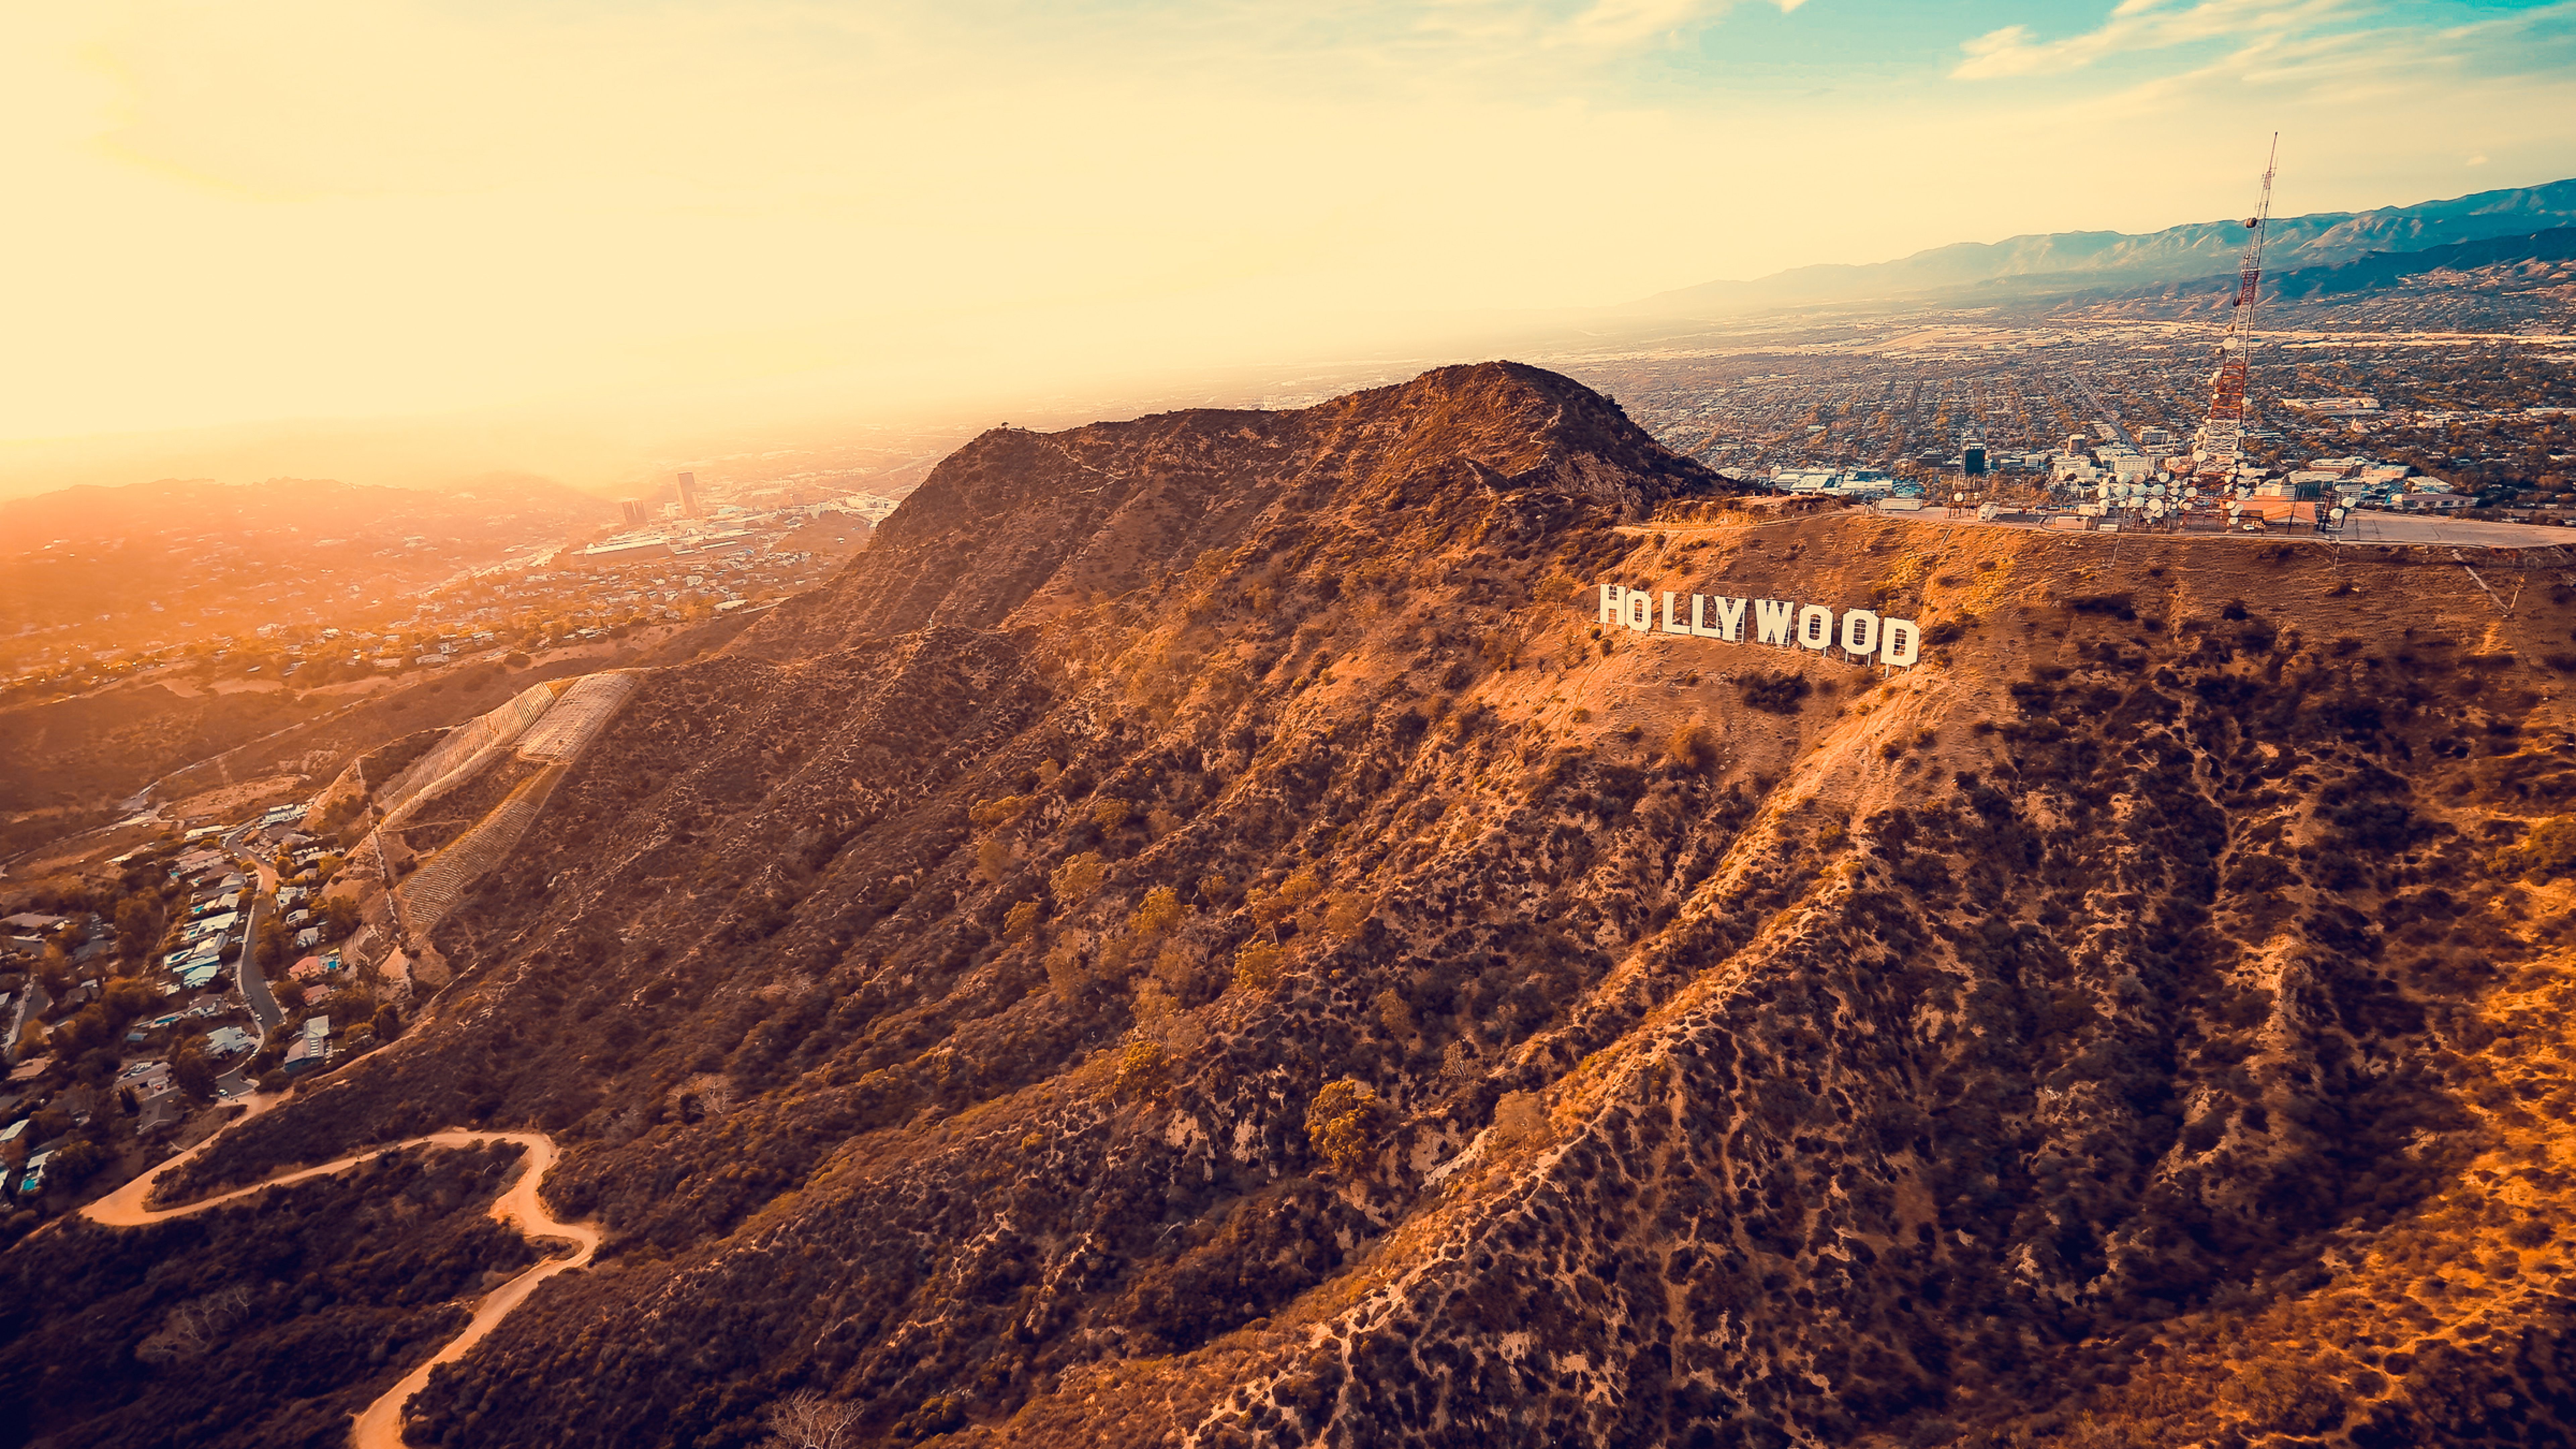 7680x4320 hollywood, mountains, los angeles 8K Wallpaper, HD